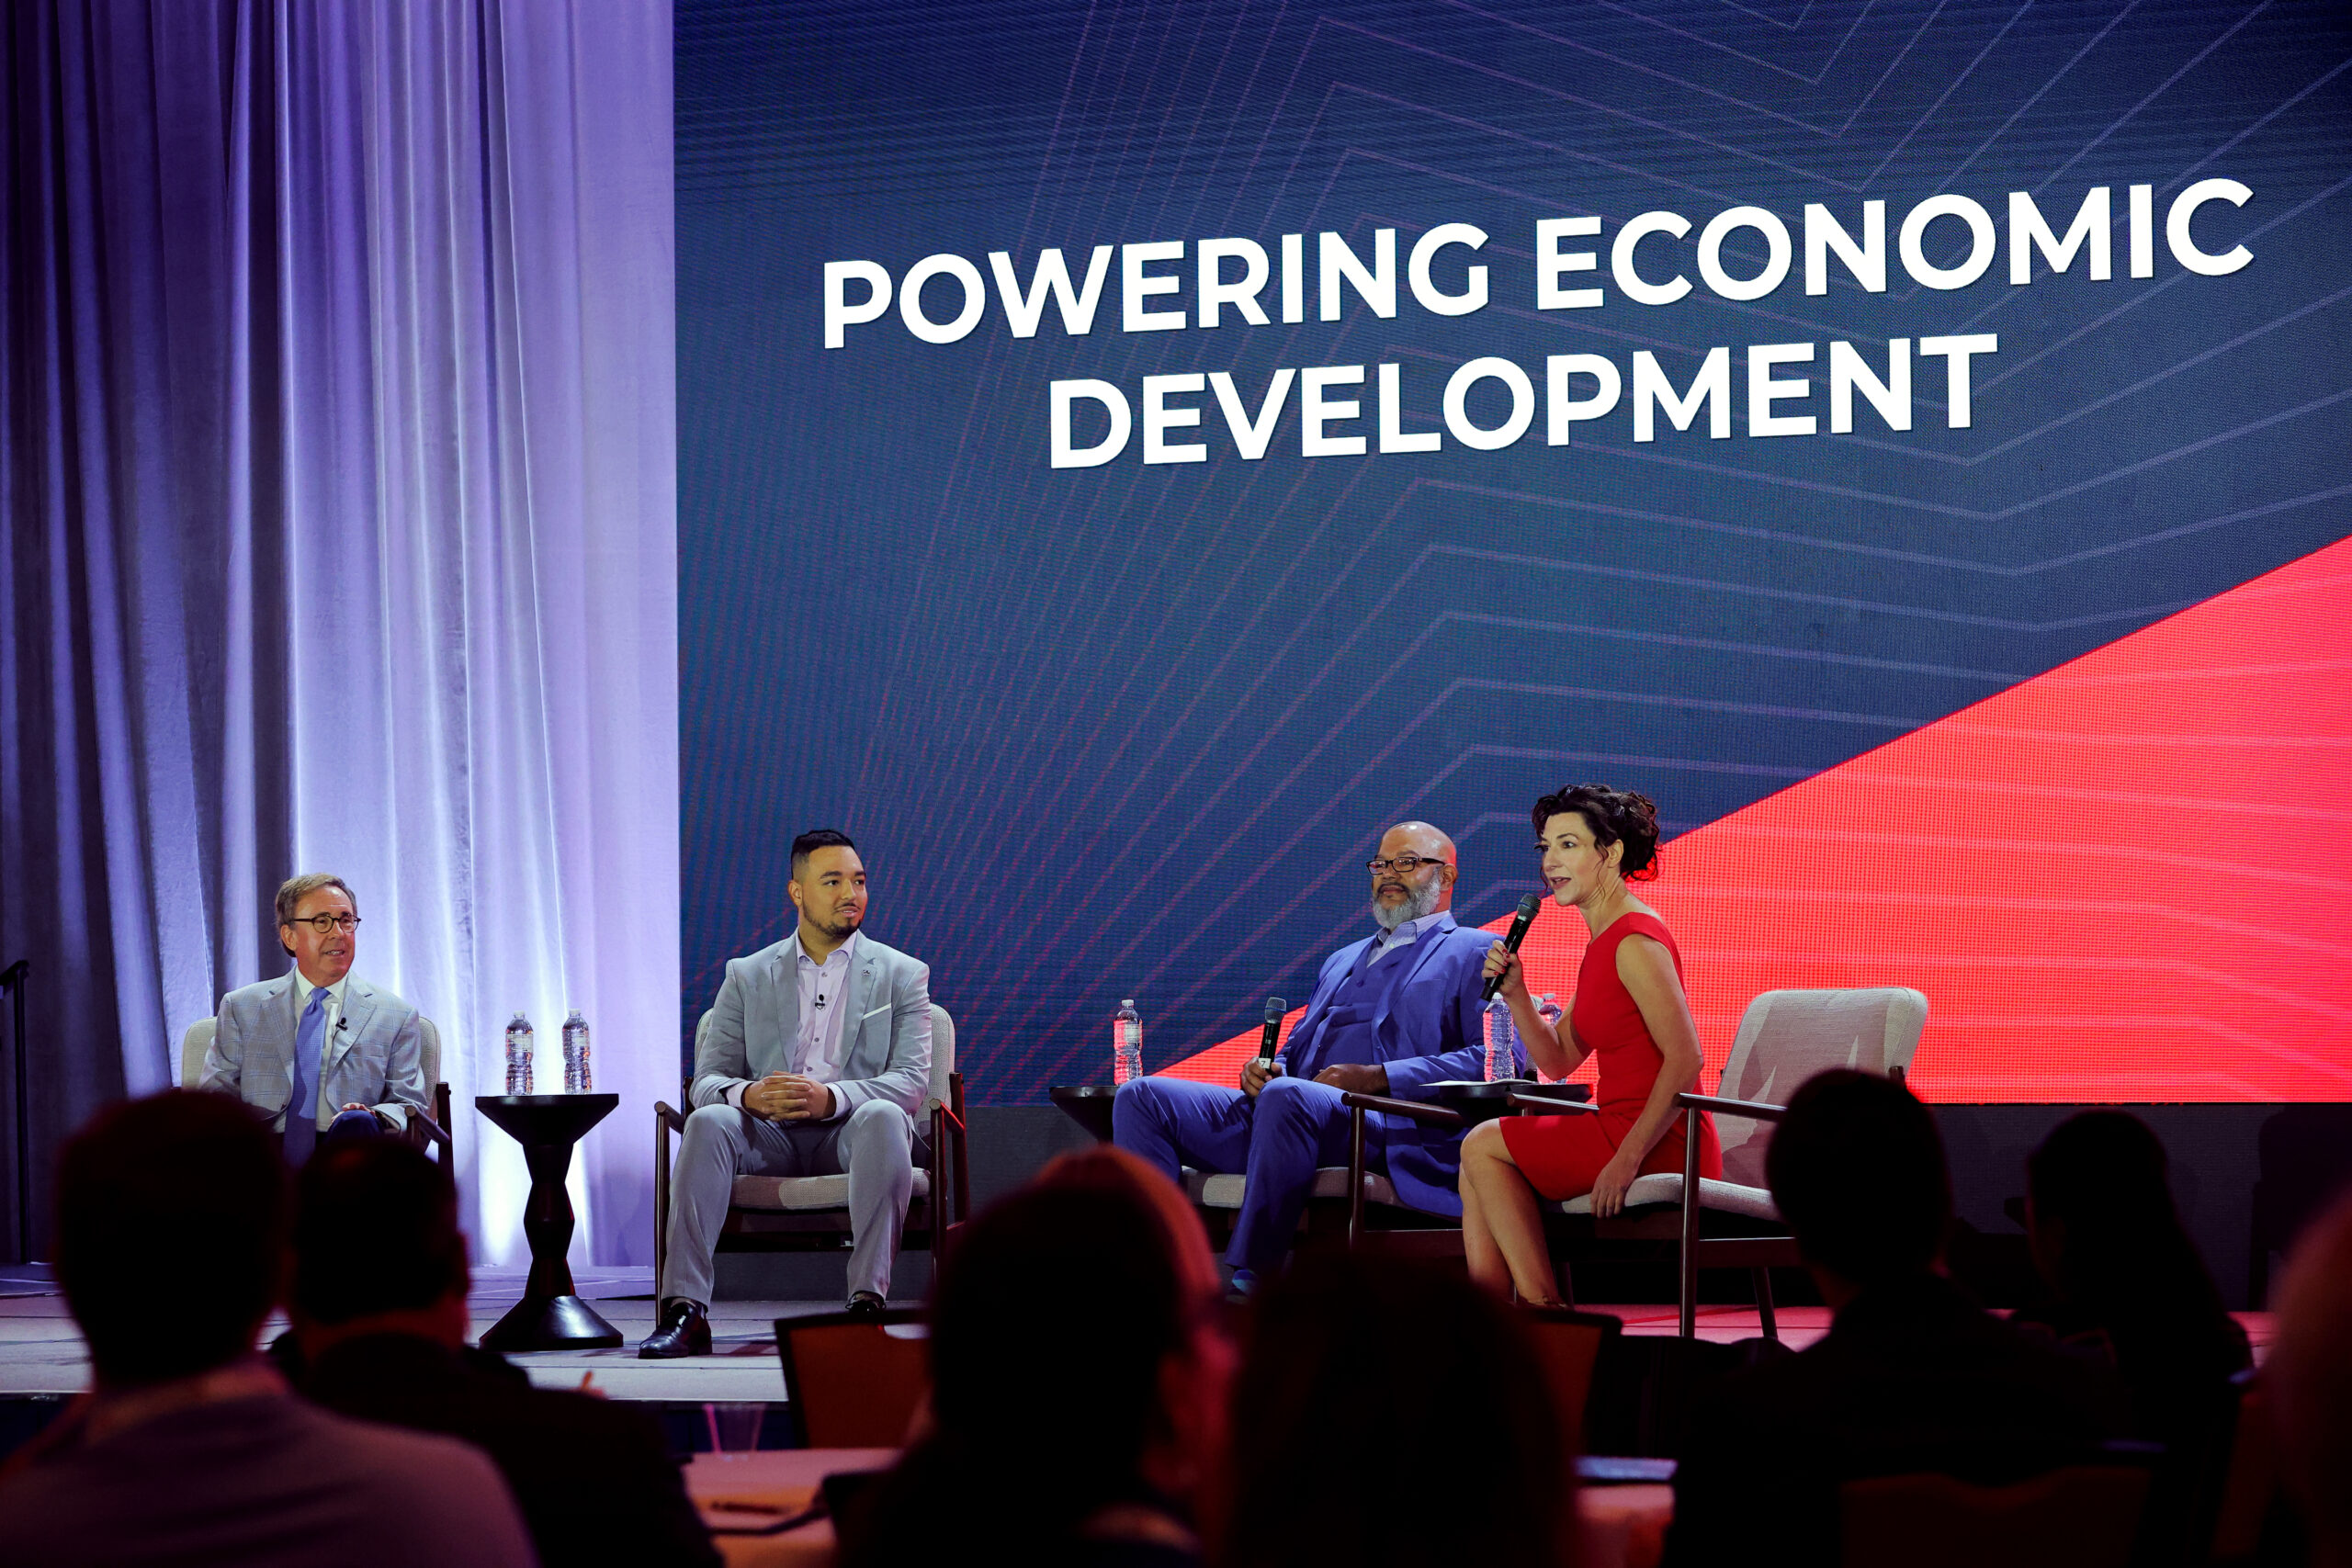 Panelists from the Powering Economic Development session at the 2023 C5 + CCIM Global Summit